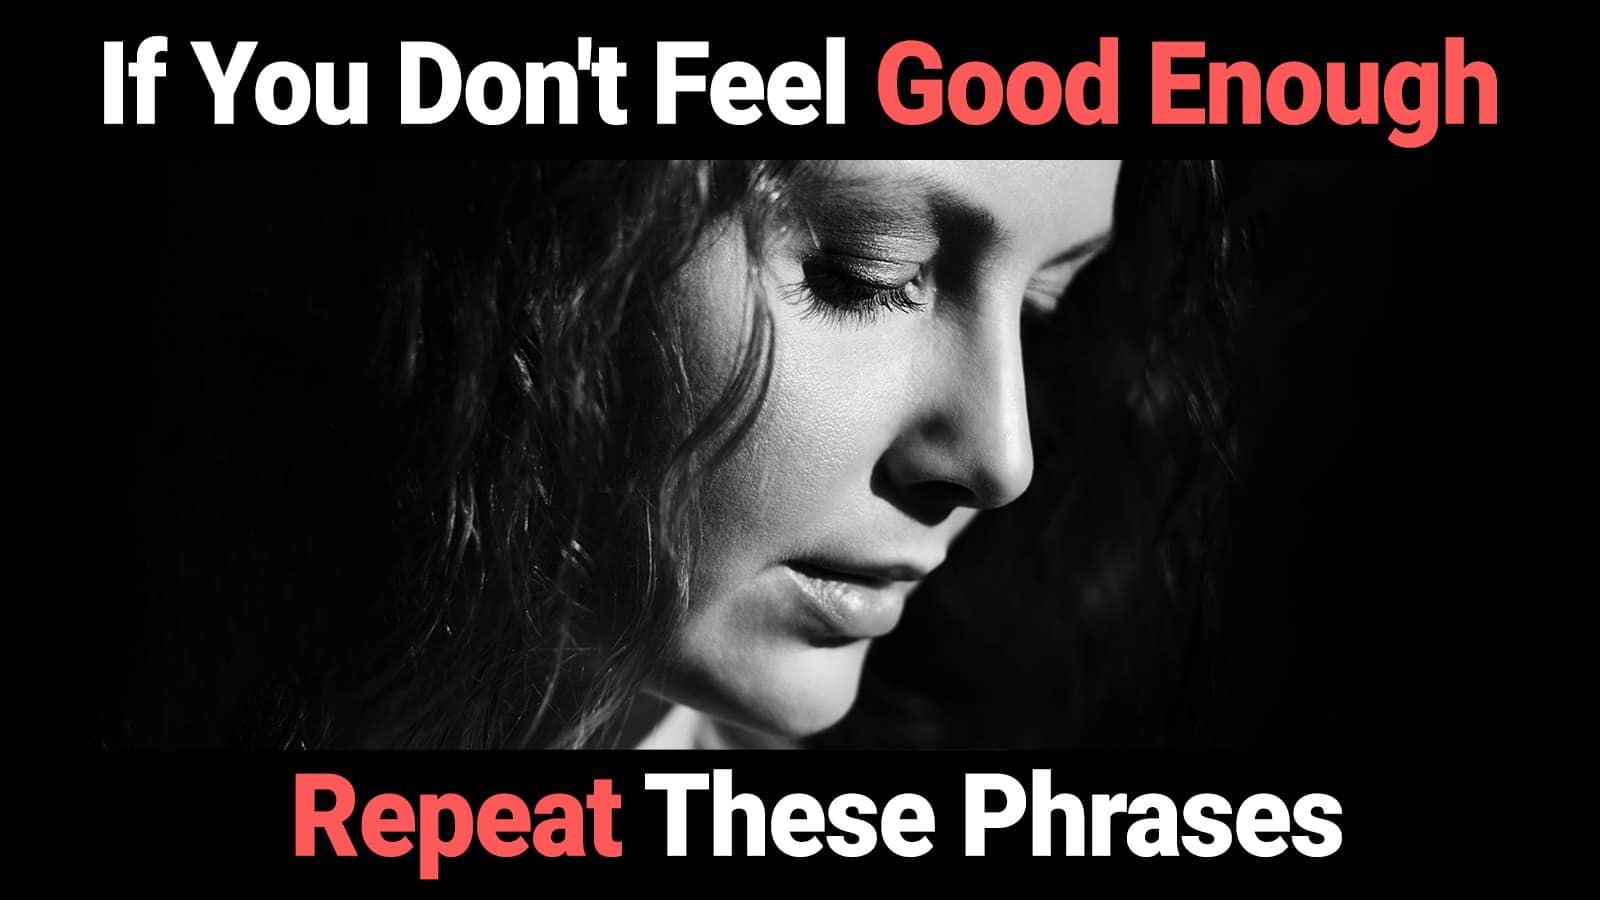 15 Phrases to Repeat When You Don’t Feel Good Enough